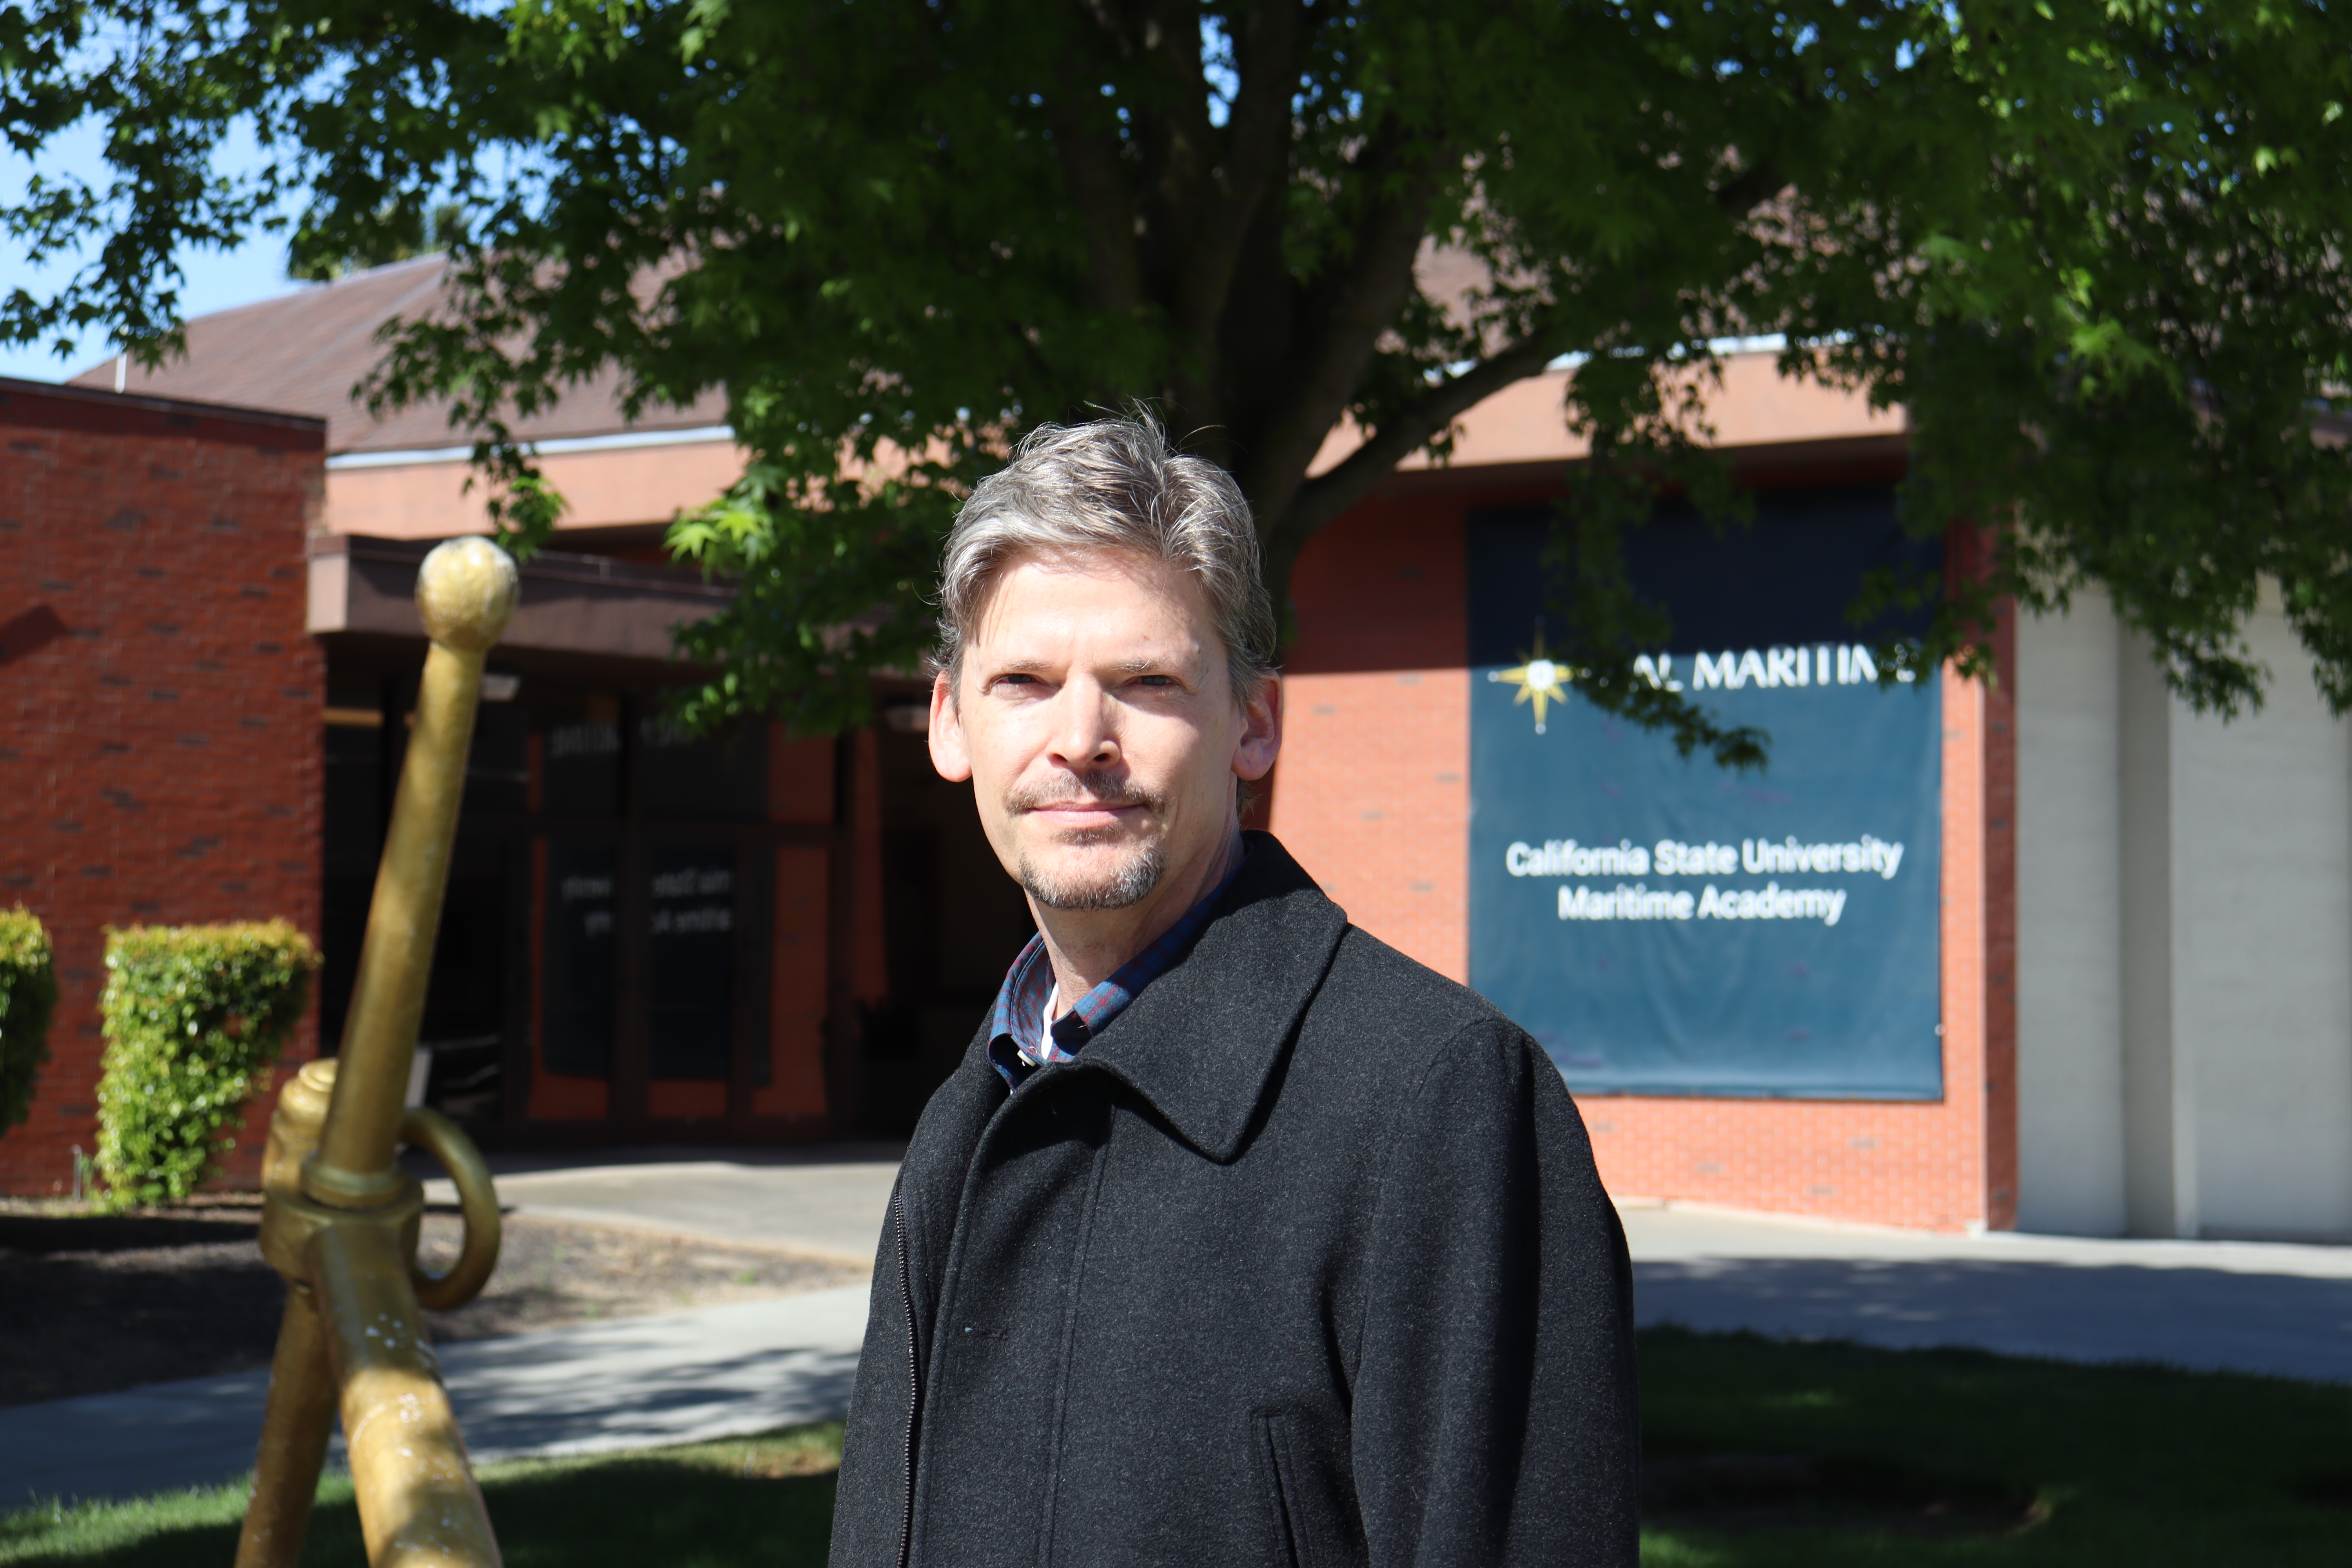 Andrew Balmat Grants Administration Manager at California State University Maritime Academy